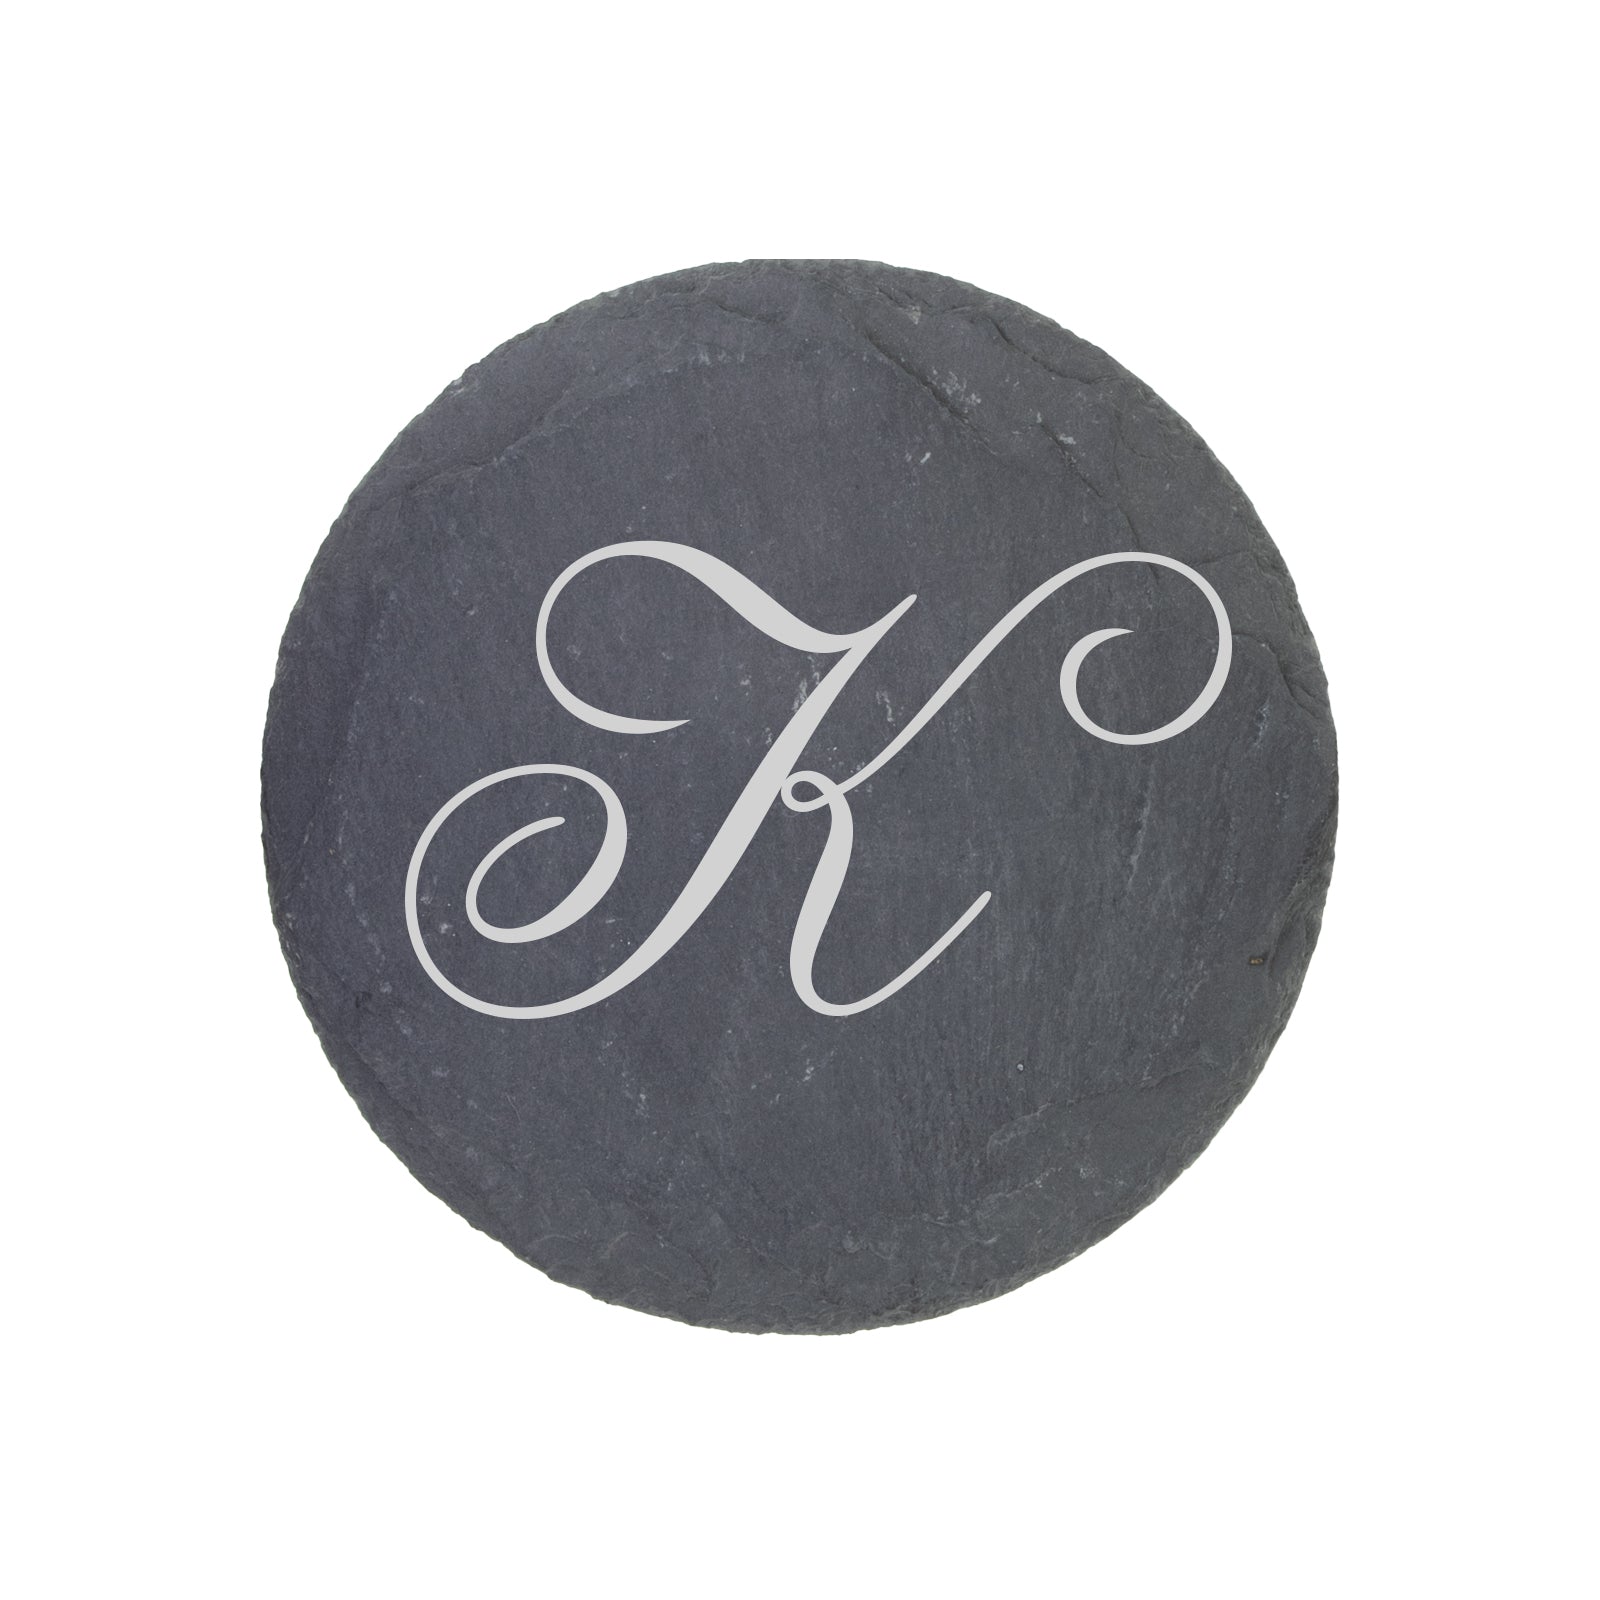 Personalised Engraved Slate Coaster Round - Cursive Lettering